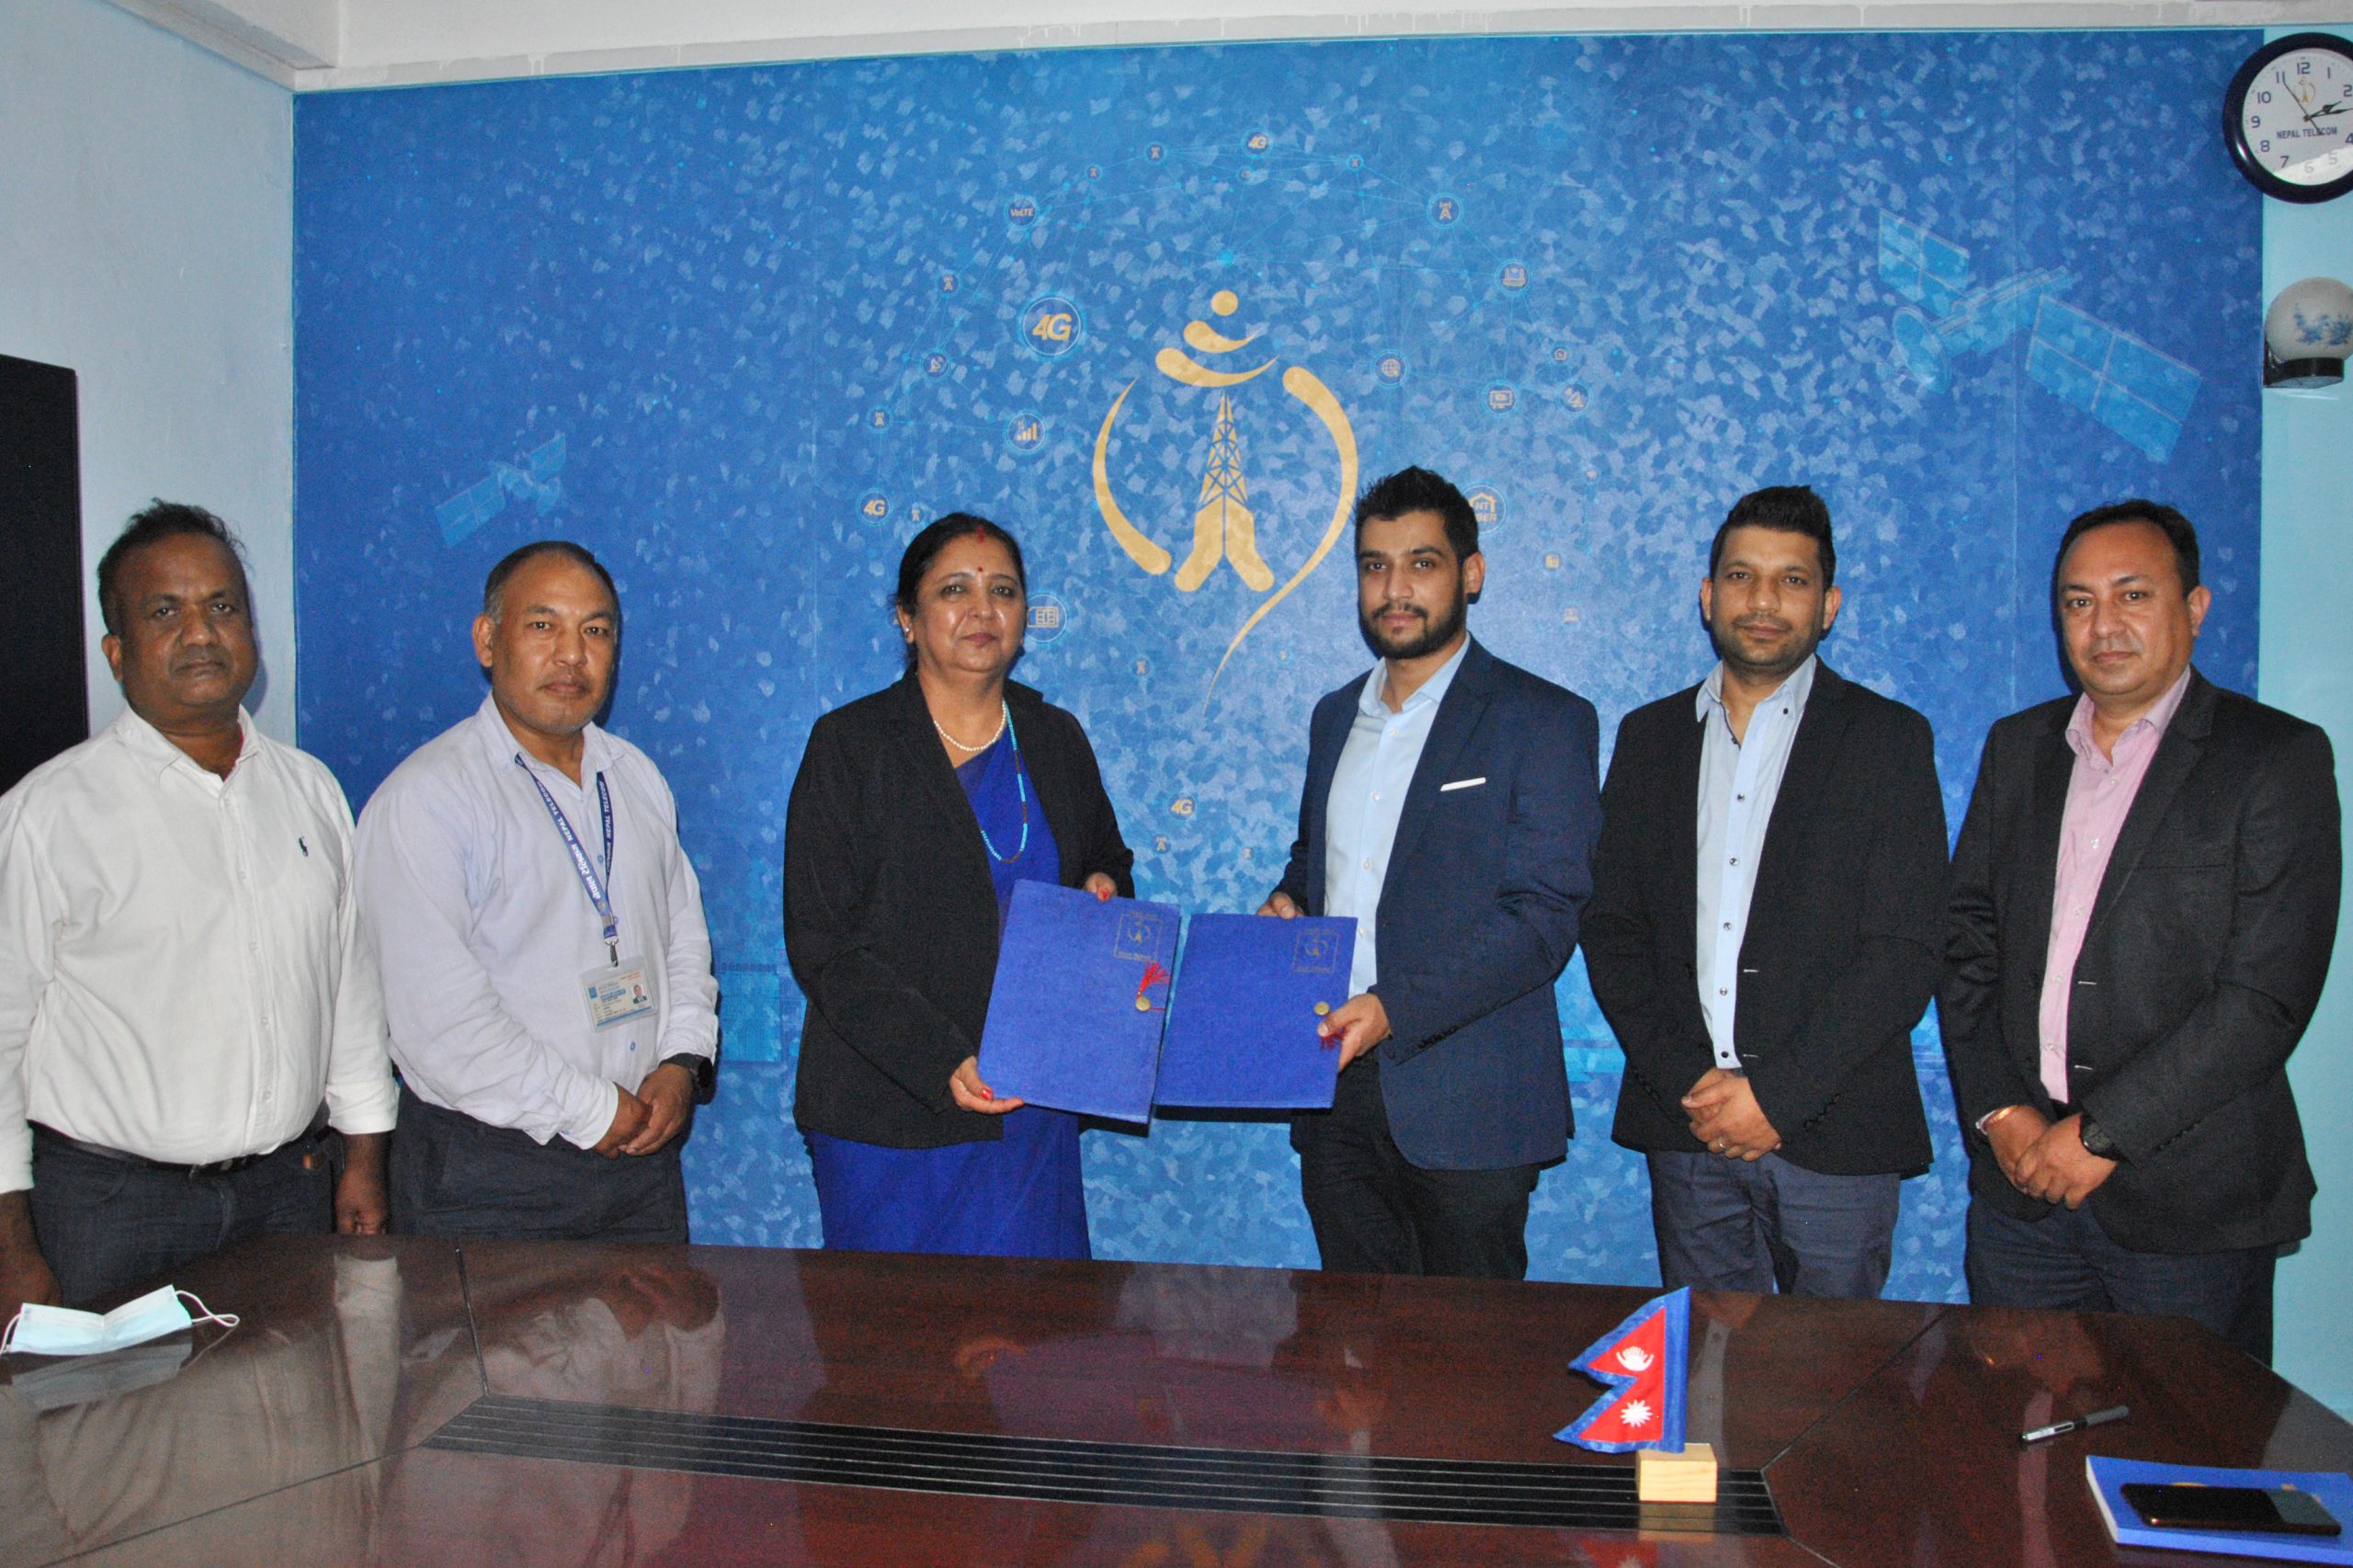 Agreement sign between Sangeeta Pahadi, chief business officer of Nepal Telecom and Aditya Anand, Chief Executive Officer of Ultimate Horizon Technologies Pvt. Limited.